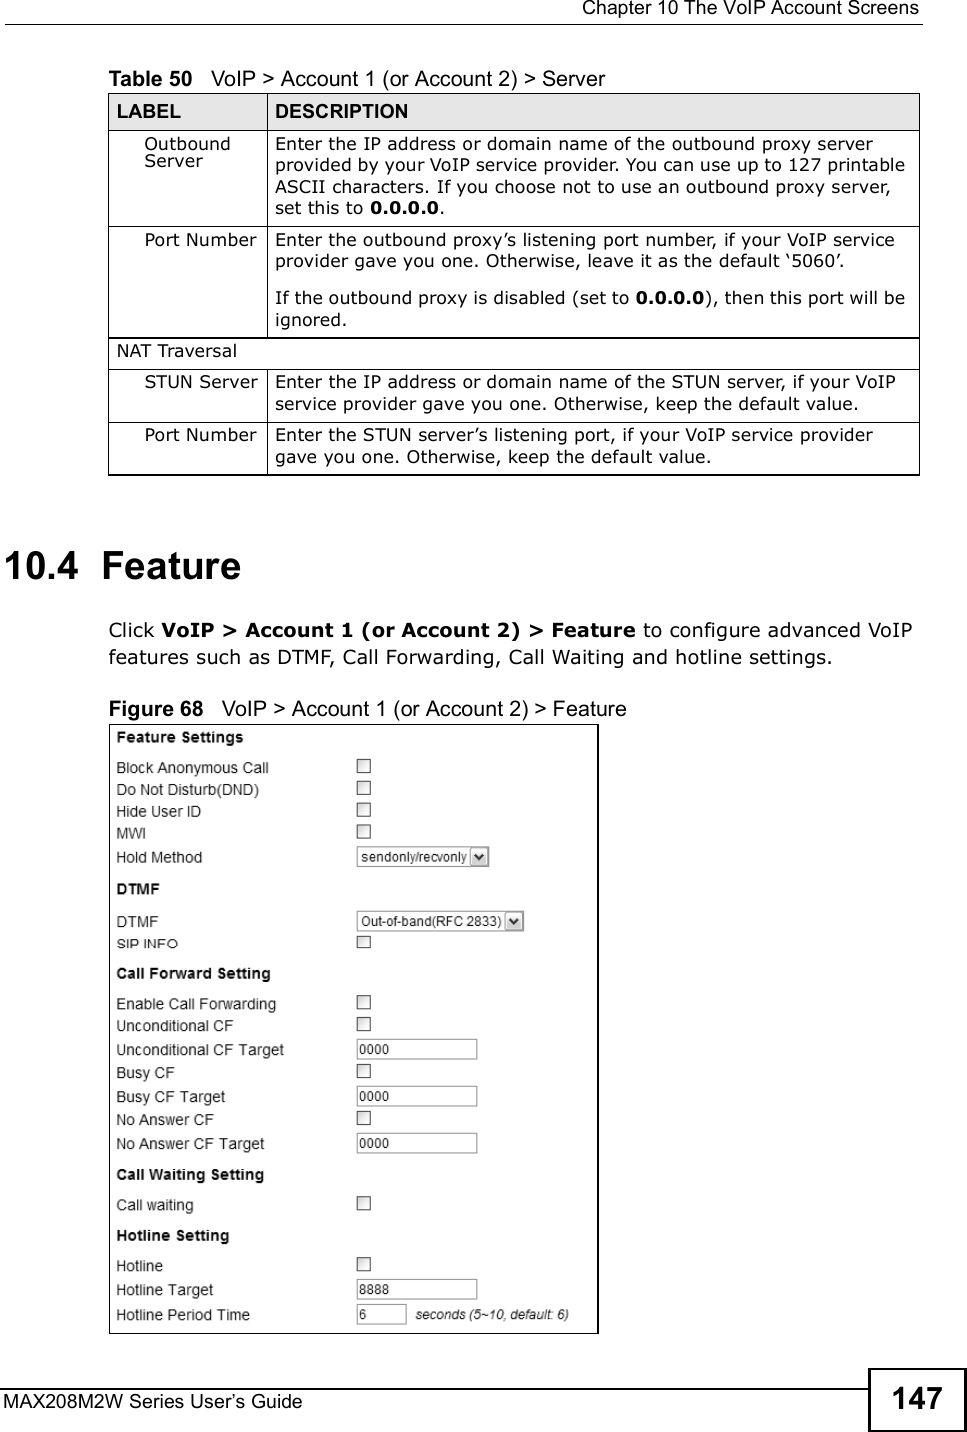  Chapter 10The VoIP Account ScreensMAX208M2W Series User s Guide 14710.4  FeatureClick VoIP &gt; Account 1 (or Account 2) &gt; Feature to configure advanced VoIP features such as DTMF, Call Forwarding, Call Waiting and hotline settings.Figure 68   VoIP &gt; Account 1 (or Account 2) &gt; FeatureOutbound ServerEnter the IP address or domain name of the outbound proxy server provided by your VoIP service provider. You can use up to 127 printable ASCII characters. If you choose not to use an outbound proxy server, set this to 0.0.0.0.Port Number Enter the outbound proxy s listening port number, if your VoIP service provider gave you one. Otherwise, leave it as the default $5060 .If the outbound proxy is disabled (set to 0.0.0.0), then this port will be ignored.NAT TraversalSTUN Server Enter the IP address or domain name of the STUN server, if your VoIP service provider gave you one. Otherwise, keep the default value.Port Number Enter the STUN server s listening port, if your VoIP service providergave you one. Otherwise, keep the default value.Table 50   VoIP &gt; Account 1 (or Account 2) &gt; ServerLABEL DESCRIPTION